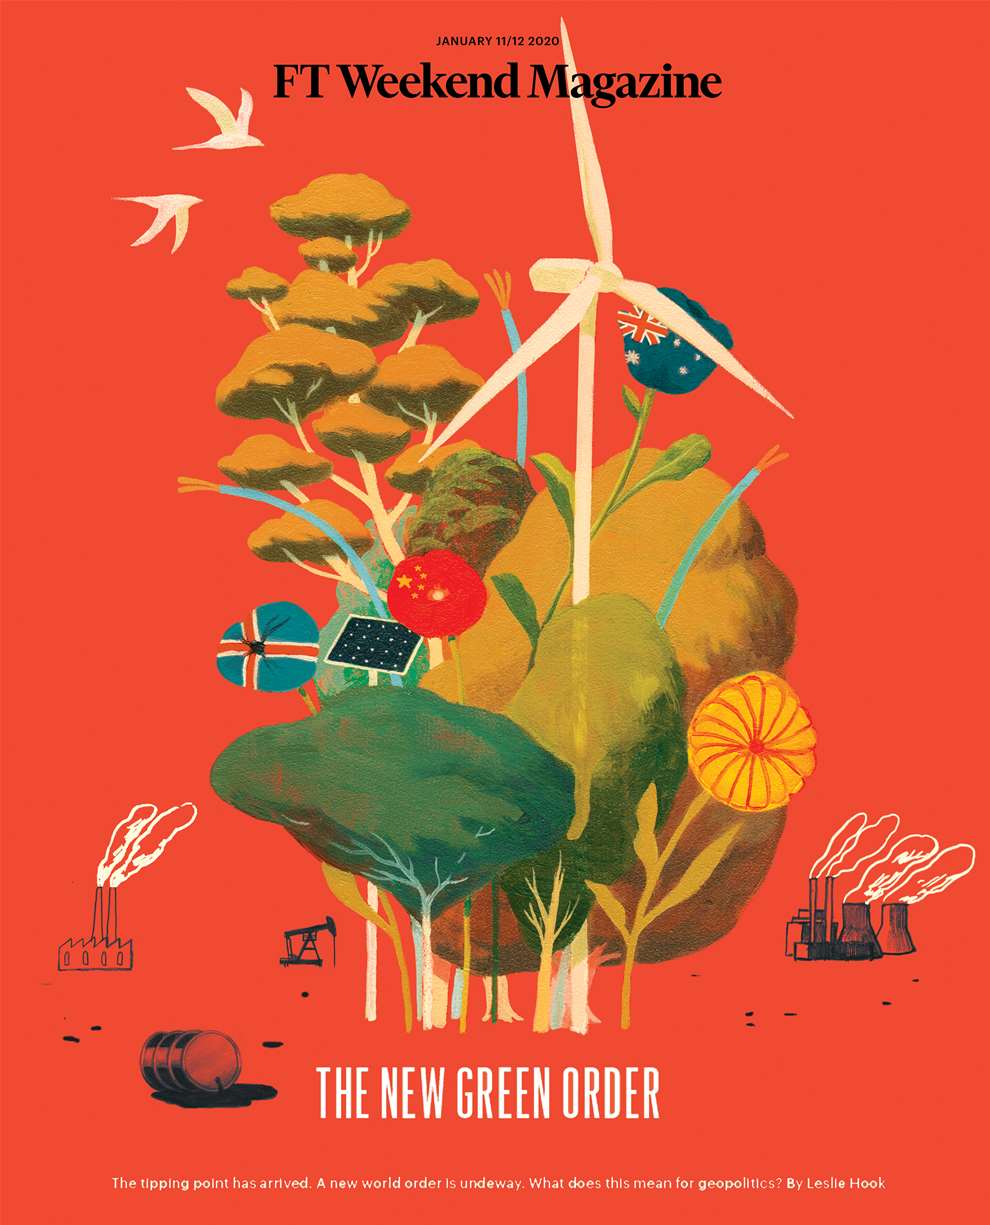 David De Las Heras, Handmade, painterly style of FT cover exploring the New Green Order. Combination of wildlife and renewable energy. 